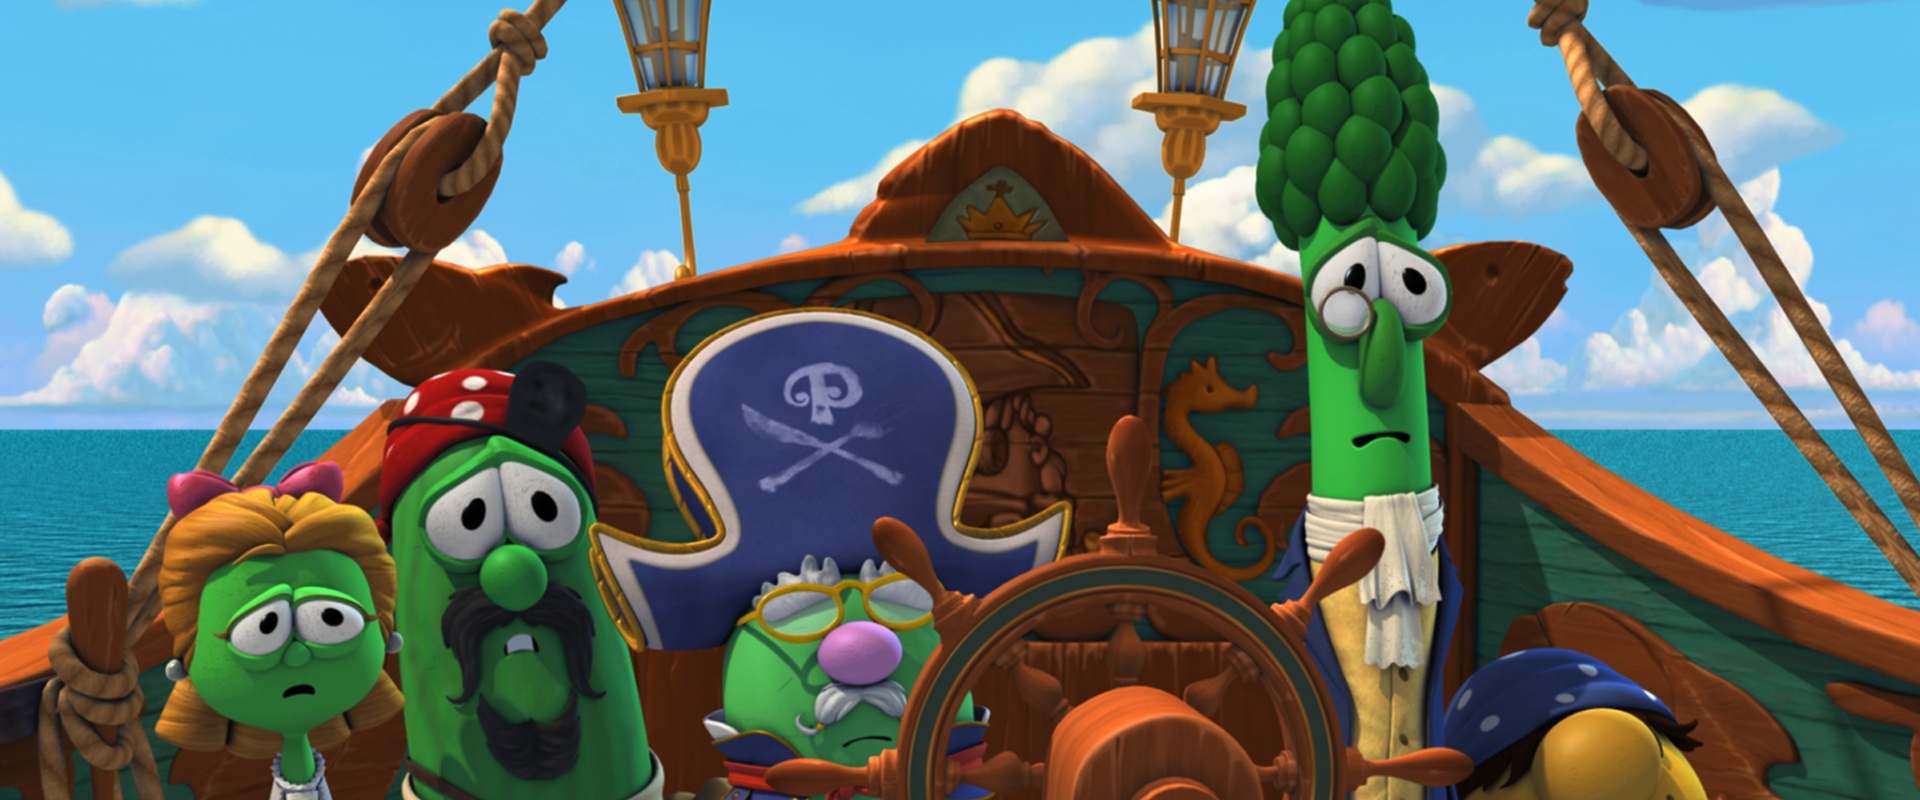 The Pirates Who Don't Do Anything: A VeggieTales Movie background 1